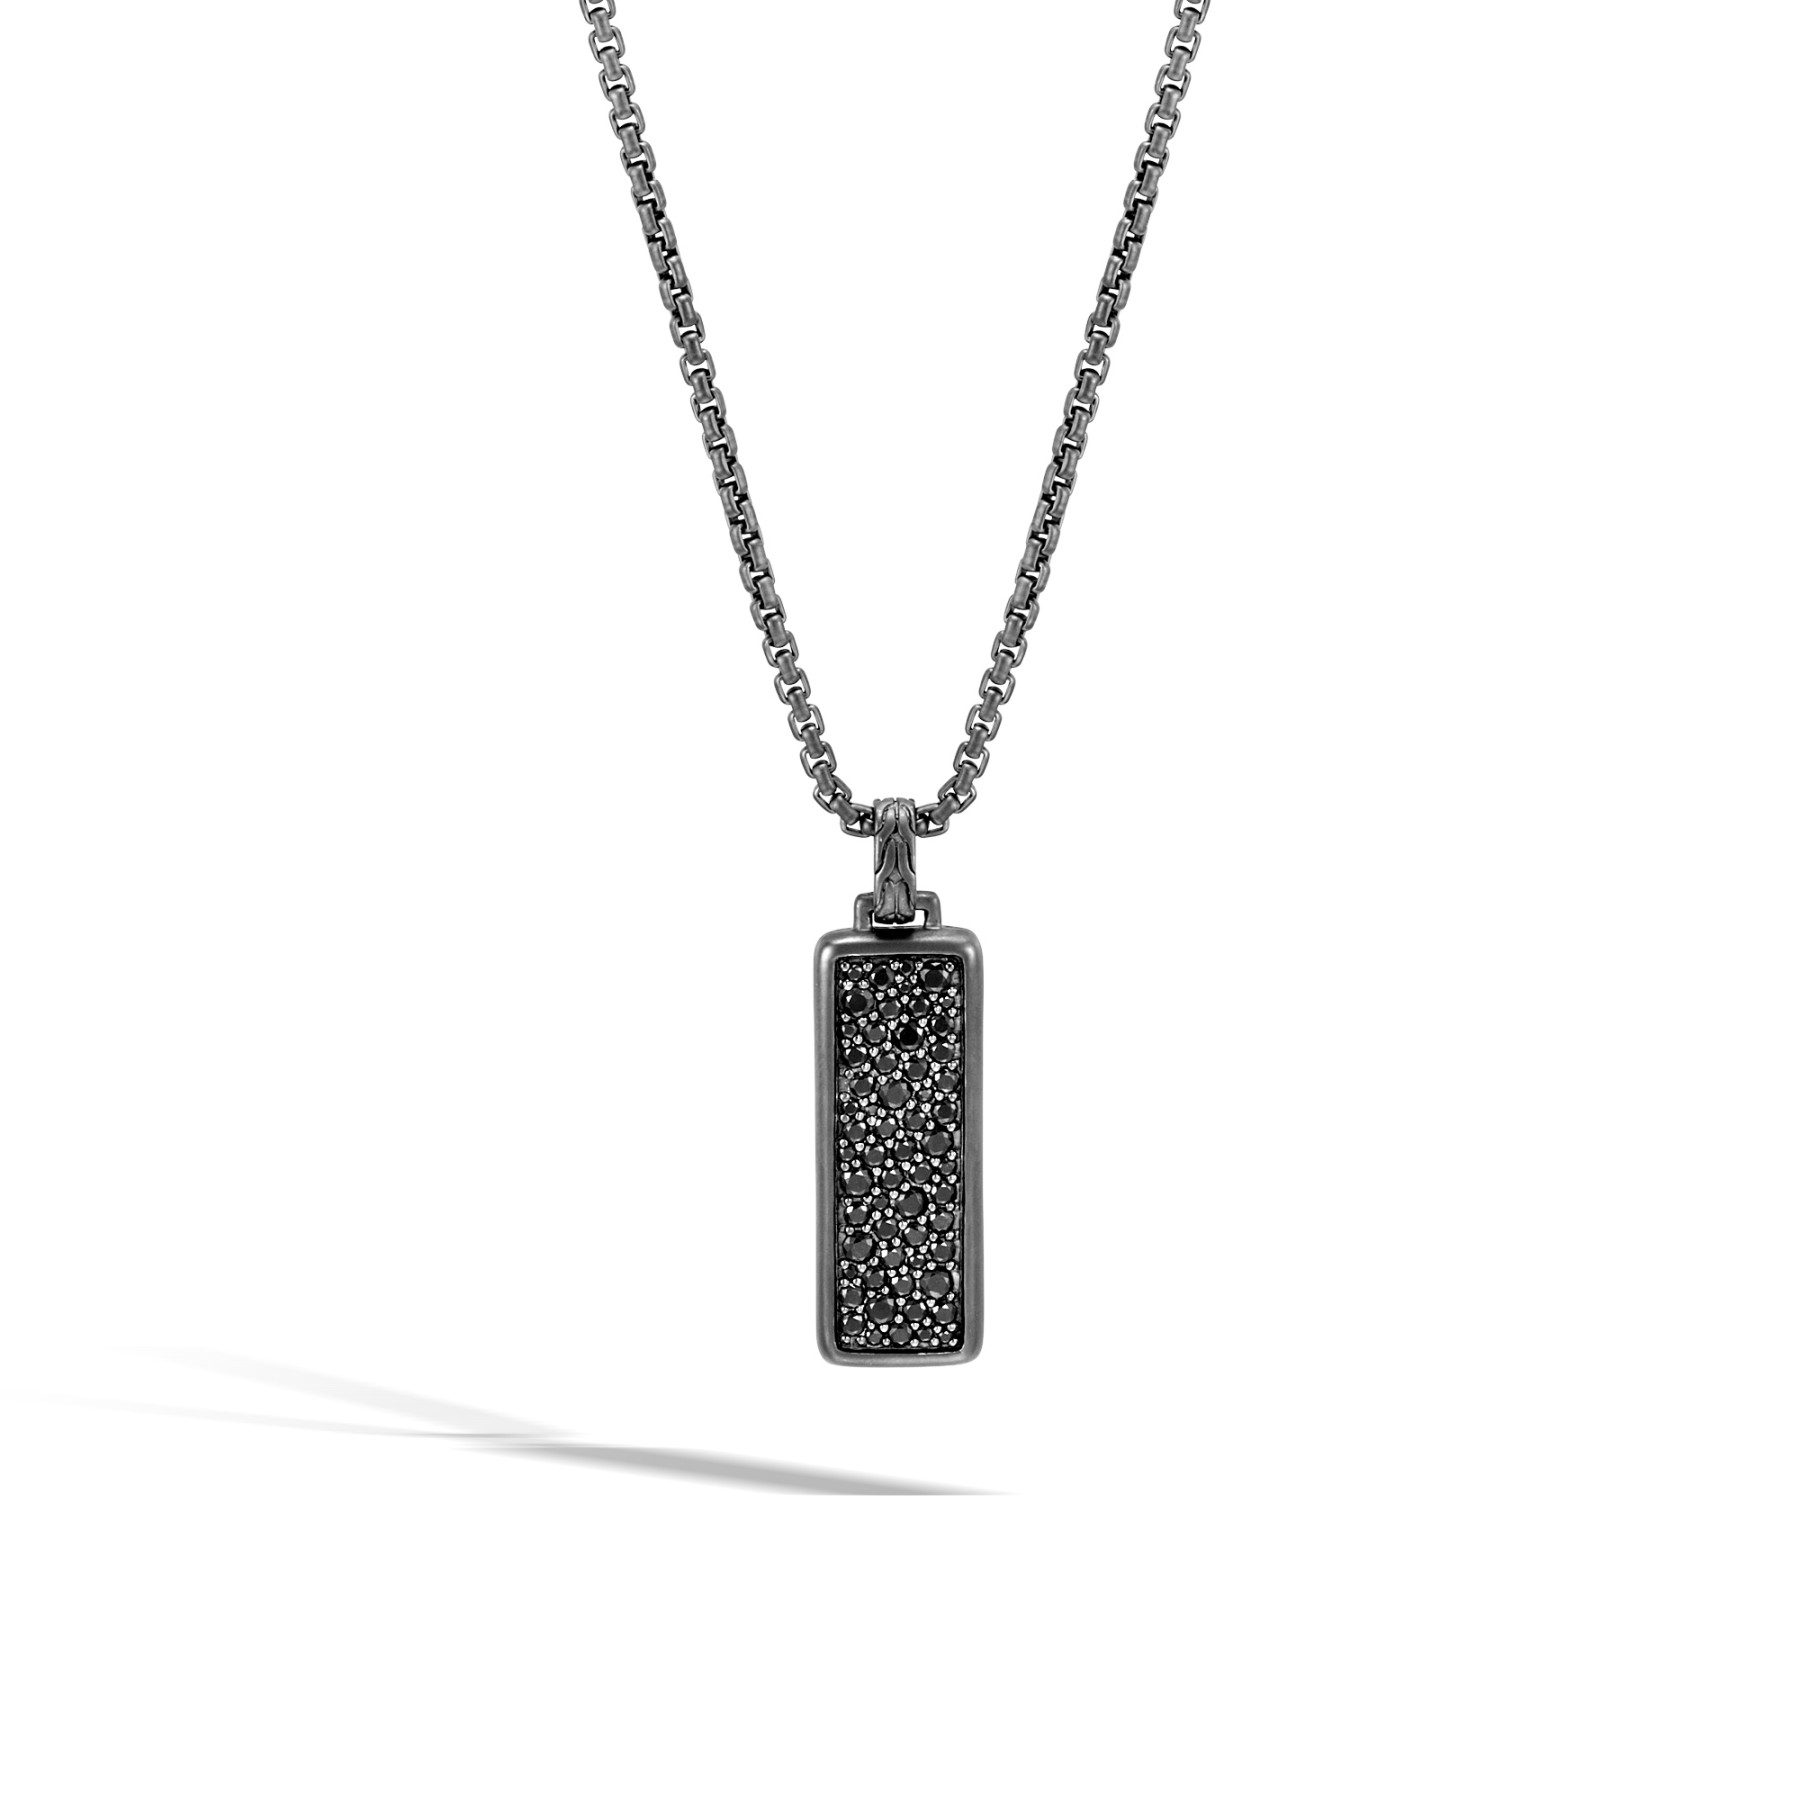 John Hardy Classic Chain Black Sapphire Pendant Necklace in Black Rhodium front view